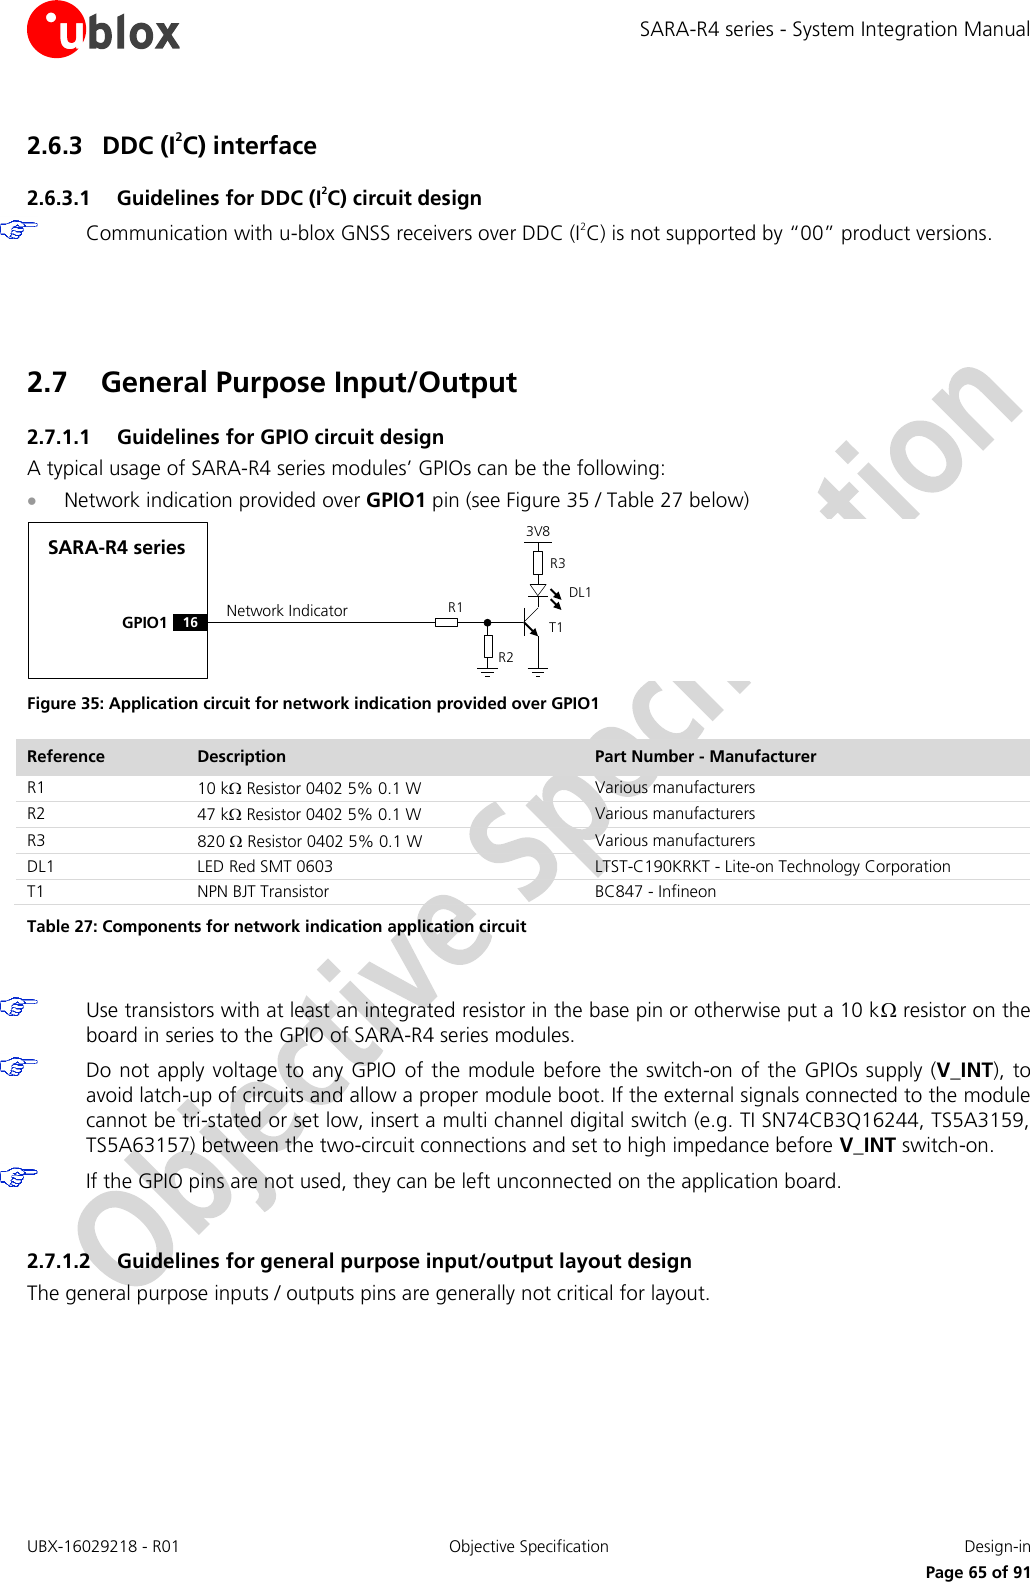 SARA-R4 series - System Integration Manual UBX-16029218 - R01  Objective Specification  Design-in     Page 65 of 91 2.6.3 DDC (I2C) interface 2.6.3.1 Guidelines for DDC (I2C) circuit design  Communication with u-blox GNSS receivers over DDC (I2C) is not supported by “00” product versions.   2.7 General Purpose Input/Output 2.7.1.1 Guidelines for GPIO circuit design A typical usage of SARA-R4 series modules’ GPIOs can be the following:  Network indication provided over GPIO1 pin (see Figure 35 / Table 27 below) SARA-R4 seriesGPIO1R1R33V8Network IndicatorR216DL1T1 Figure 35: Application circuit for network indication provided over GPIO1 Reference Description Part Number - Manufacturer R1 10 k Resistor 0402 5% 0.1 W Various manufacturers R2 47 k Resistor 0402 5% 0.1 W Various manufacturers R3 820  Resistor 0402 5% 0.1 W Various manufacturers DL1 LED Red SMT 0603 LTST-C190KRKT - Lite-on Technology Corporation T1 NPN BJT Transistor BC847 - Infineon Table 27: Components for network indication application circuit   Use transistors with at least an integrated resistor in the base pin or otherwise put a 10 k resistor on the board in series to the GPIO of SARA-R4 series modules.  Do not apply voltage  to  any GPIO  of the module before the switch-on of the GPIOs  supply (V_INT),  to avoid latch-up of circuits and allow a proper module boot. If the external signals connected to the module cannot be tri-stated or set low, insert a multi channel digital switch (e.g. TI SN74CB3Q16244, TS5A3159, TS5A63157) between the two-circuit connections and set to high impedance before V_INT switch-on.  If the GPIO pins are not used, they can be left unconnected on the application board.  2.7.1.2 Guidelines for general purpose input/output layout design The general purpose inputs / outputs pins are generally not critical for layout.  